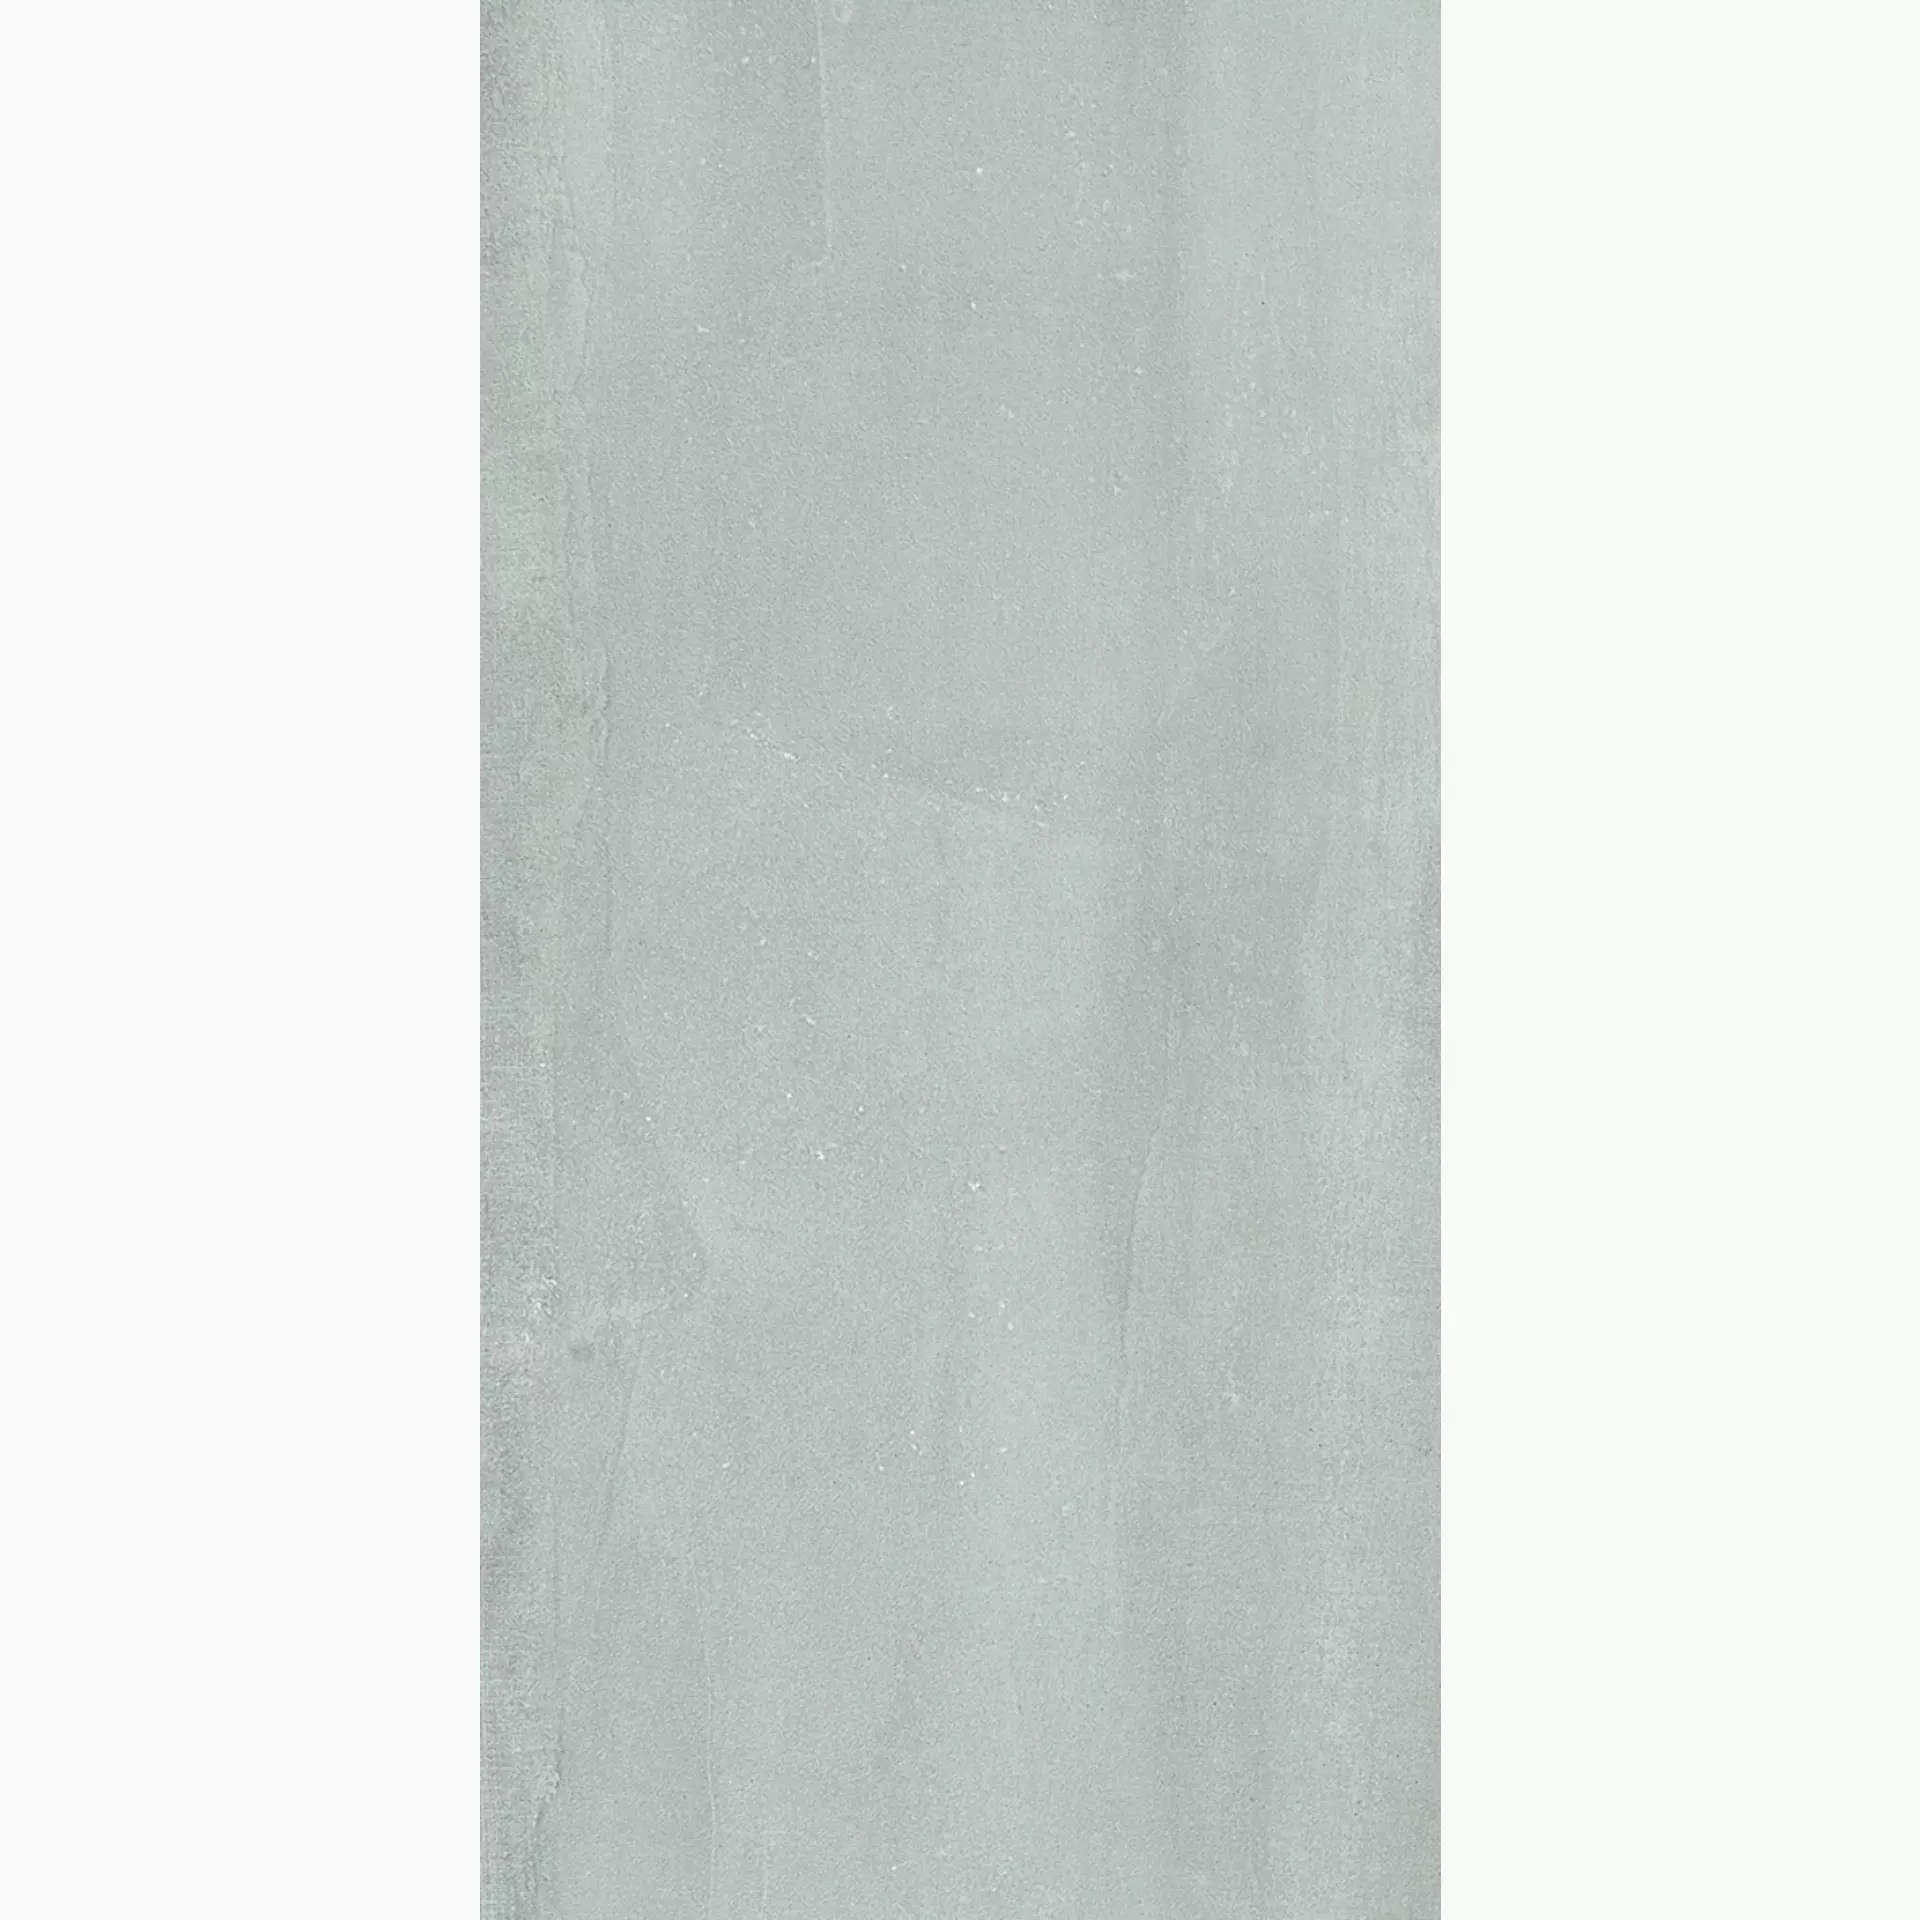 Provenza Gesso Pearl Grey Naturale E34C 40x80cm rectified 9,5mm